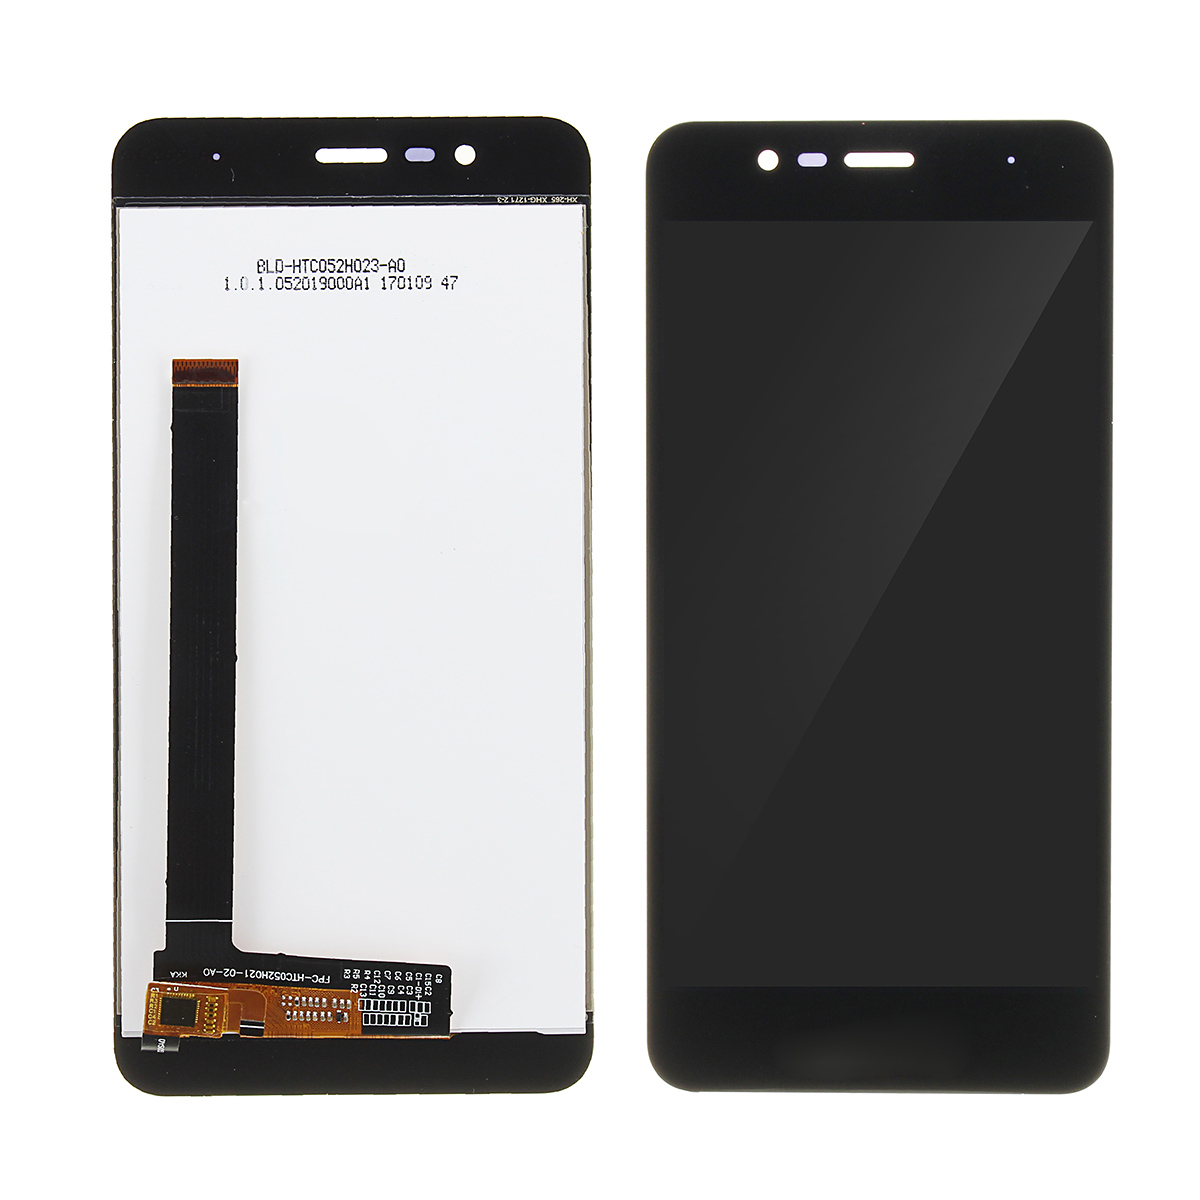 

Touch Screen Digitizer+LCD Display Assembly Screen Replacement For 5.2" Asus Zenfone 3 Max ZC520TL